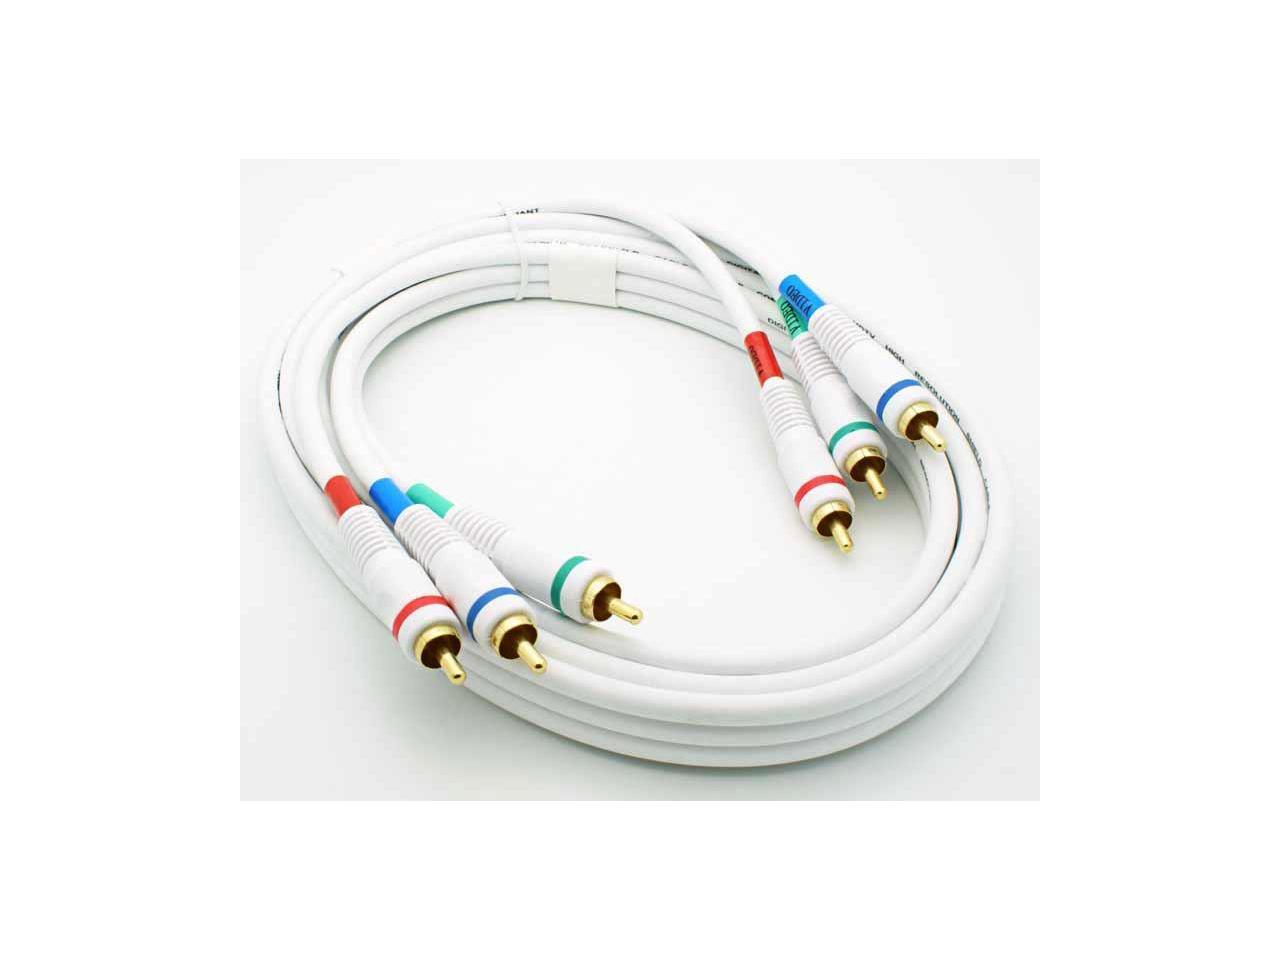 wii hdtv cable